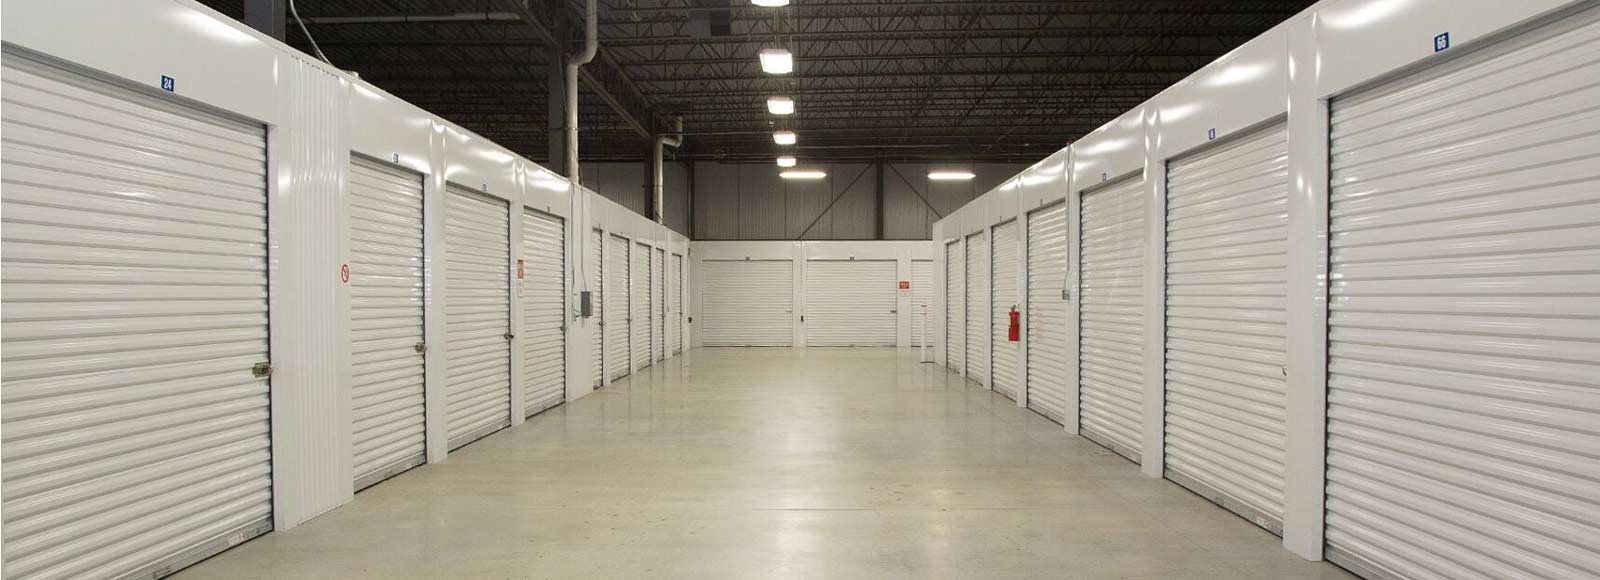 Inside View in Storage of America